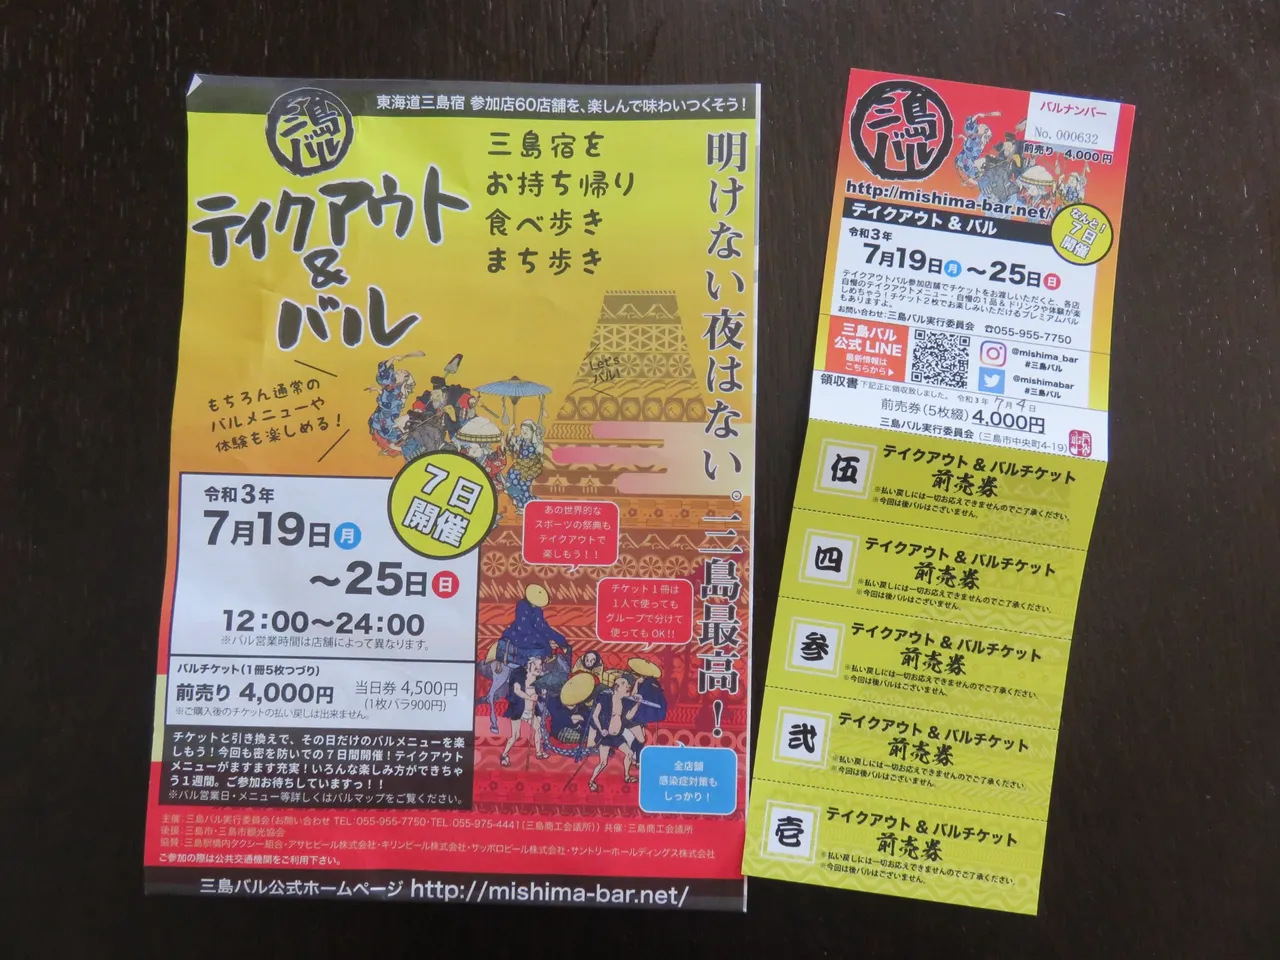 The tickets and the map.